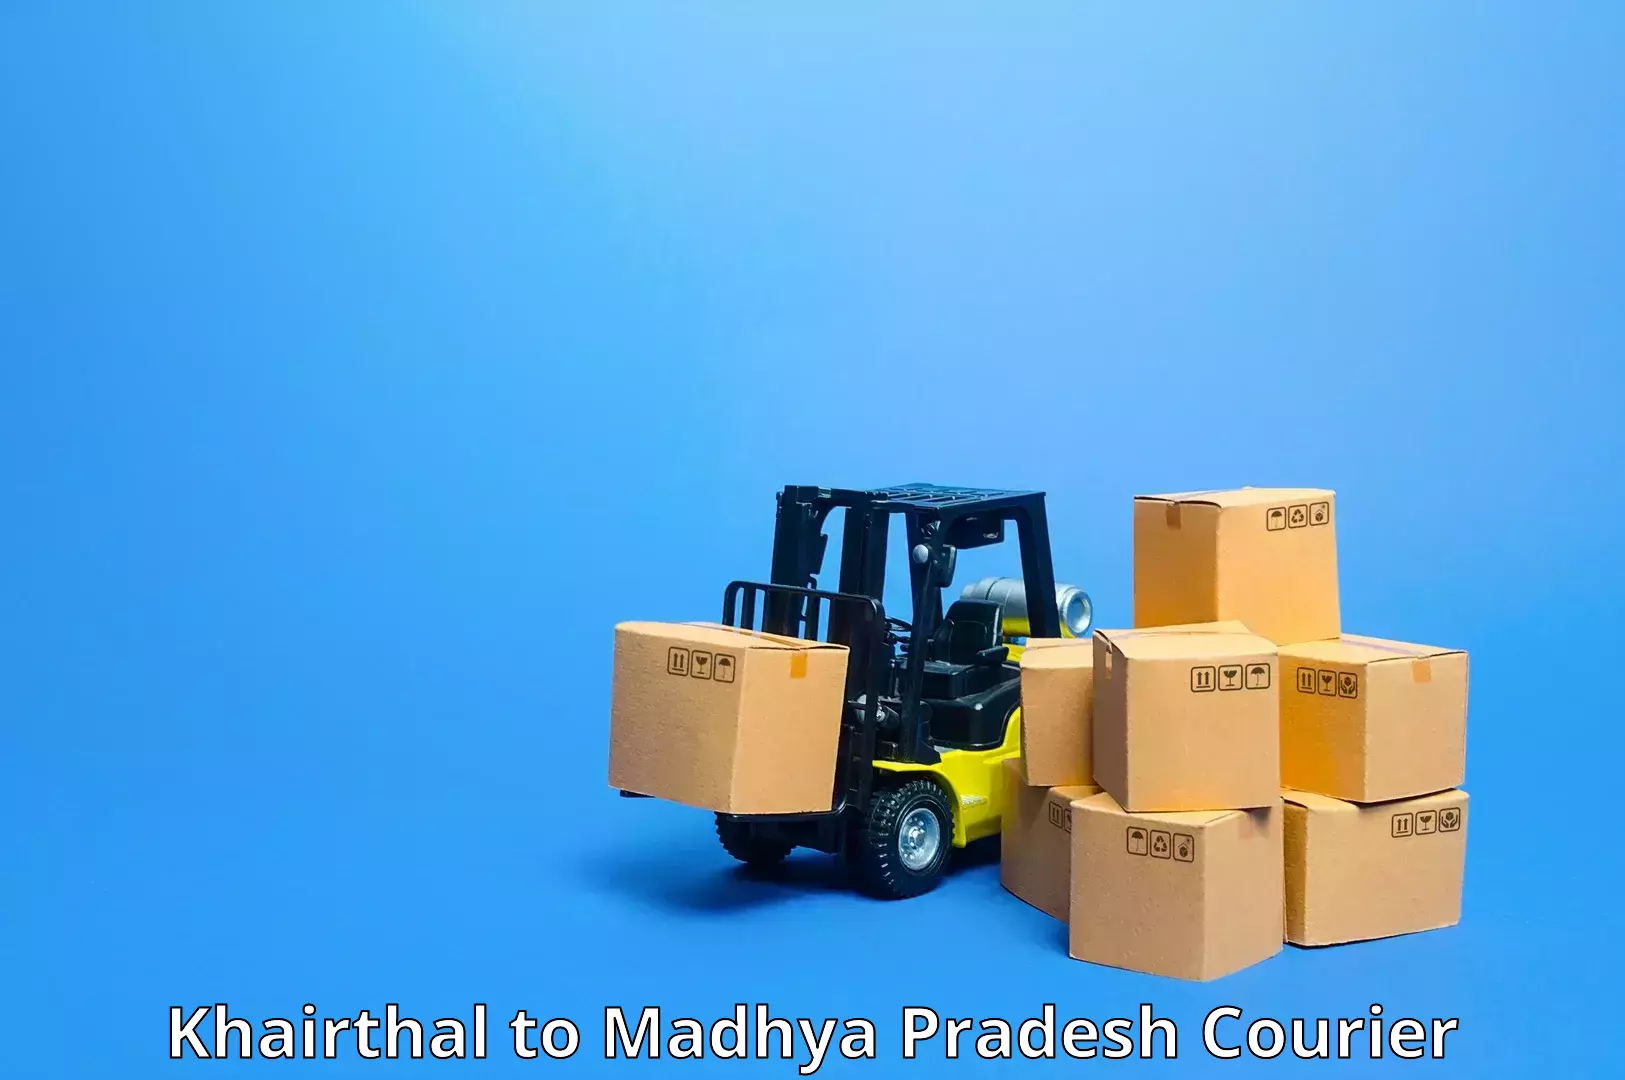 Automated shipping Khairthal to Indore